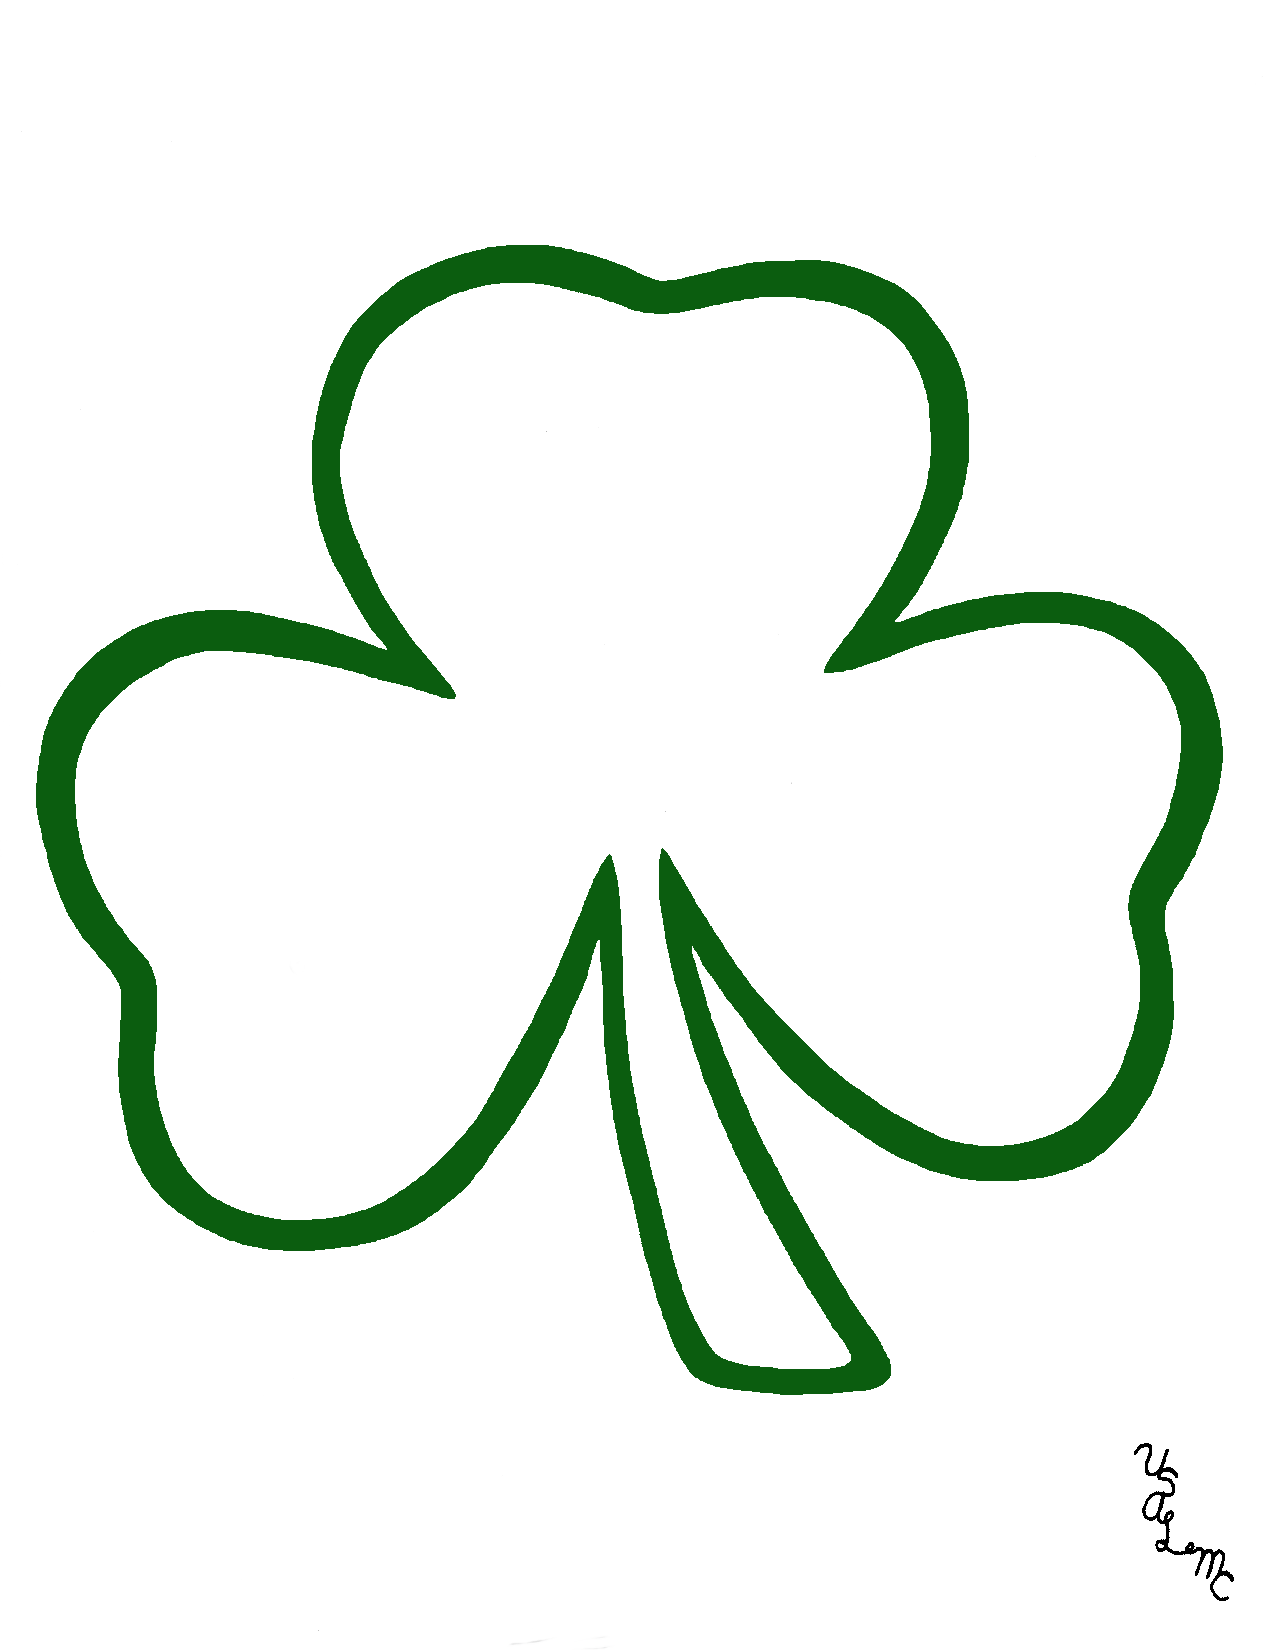 shamrock clipart black and white png